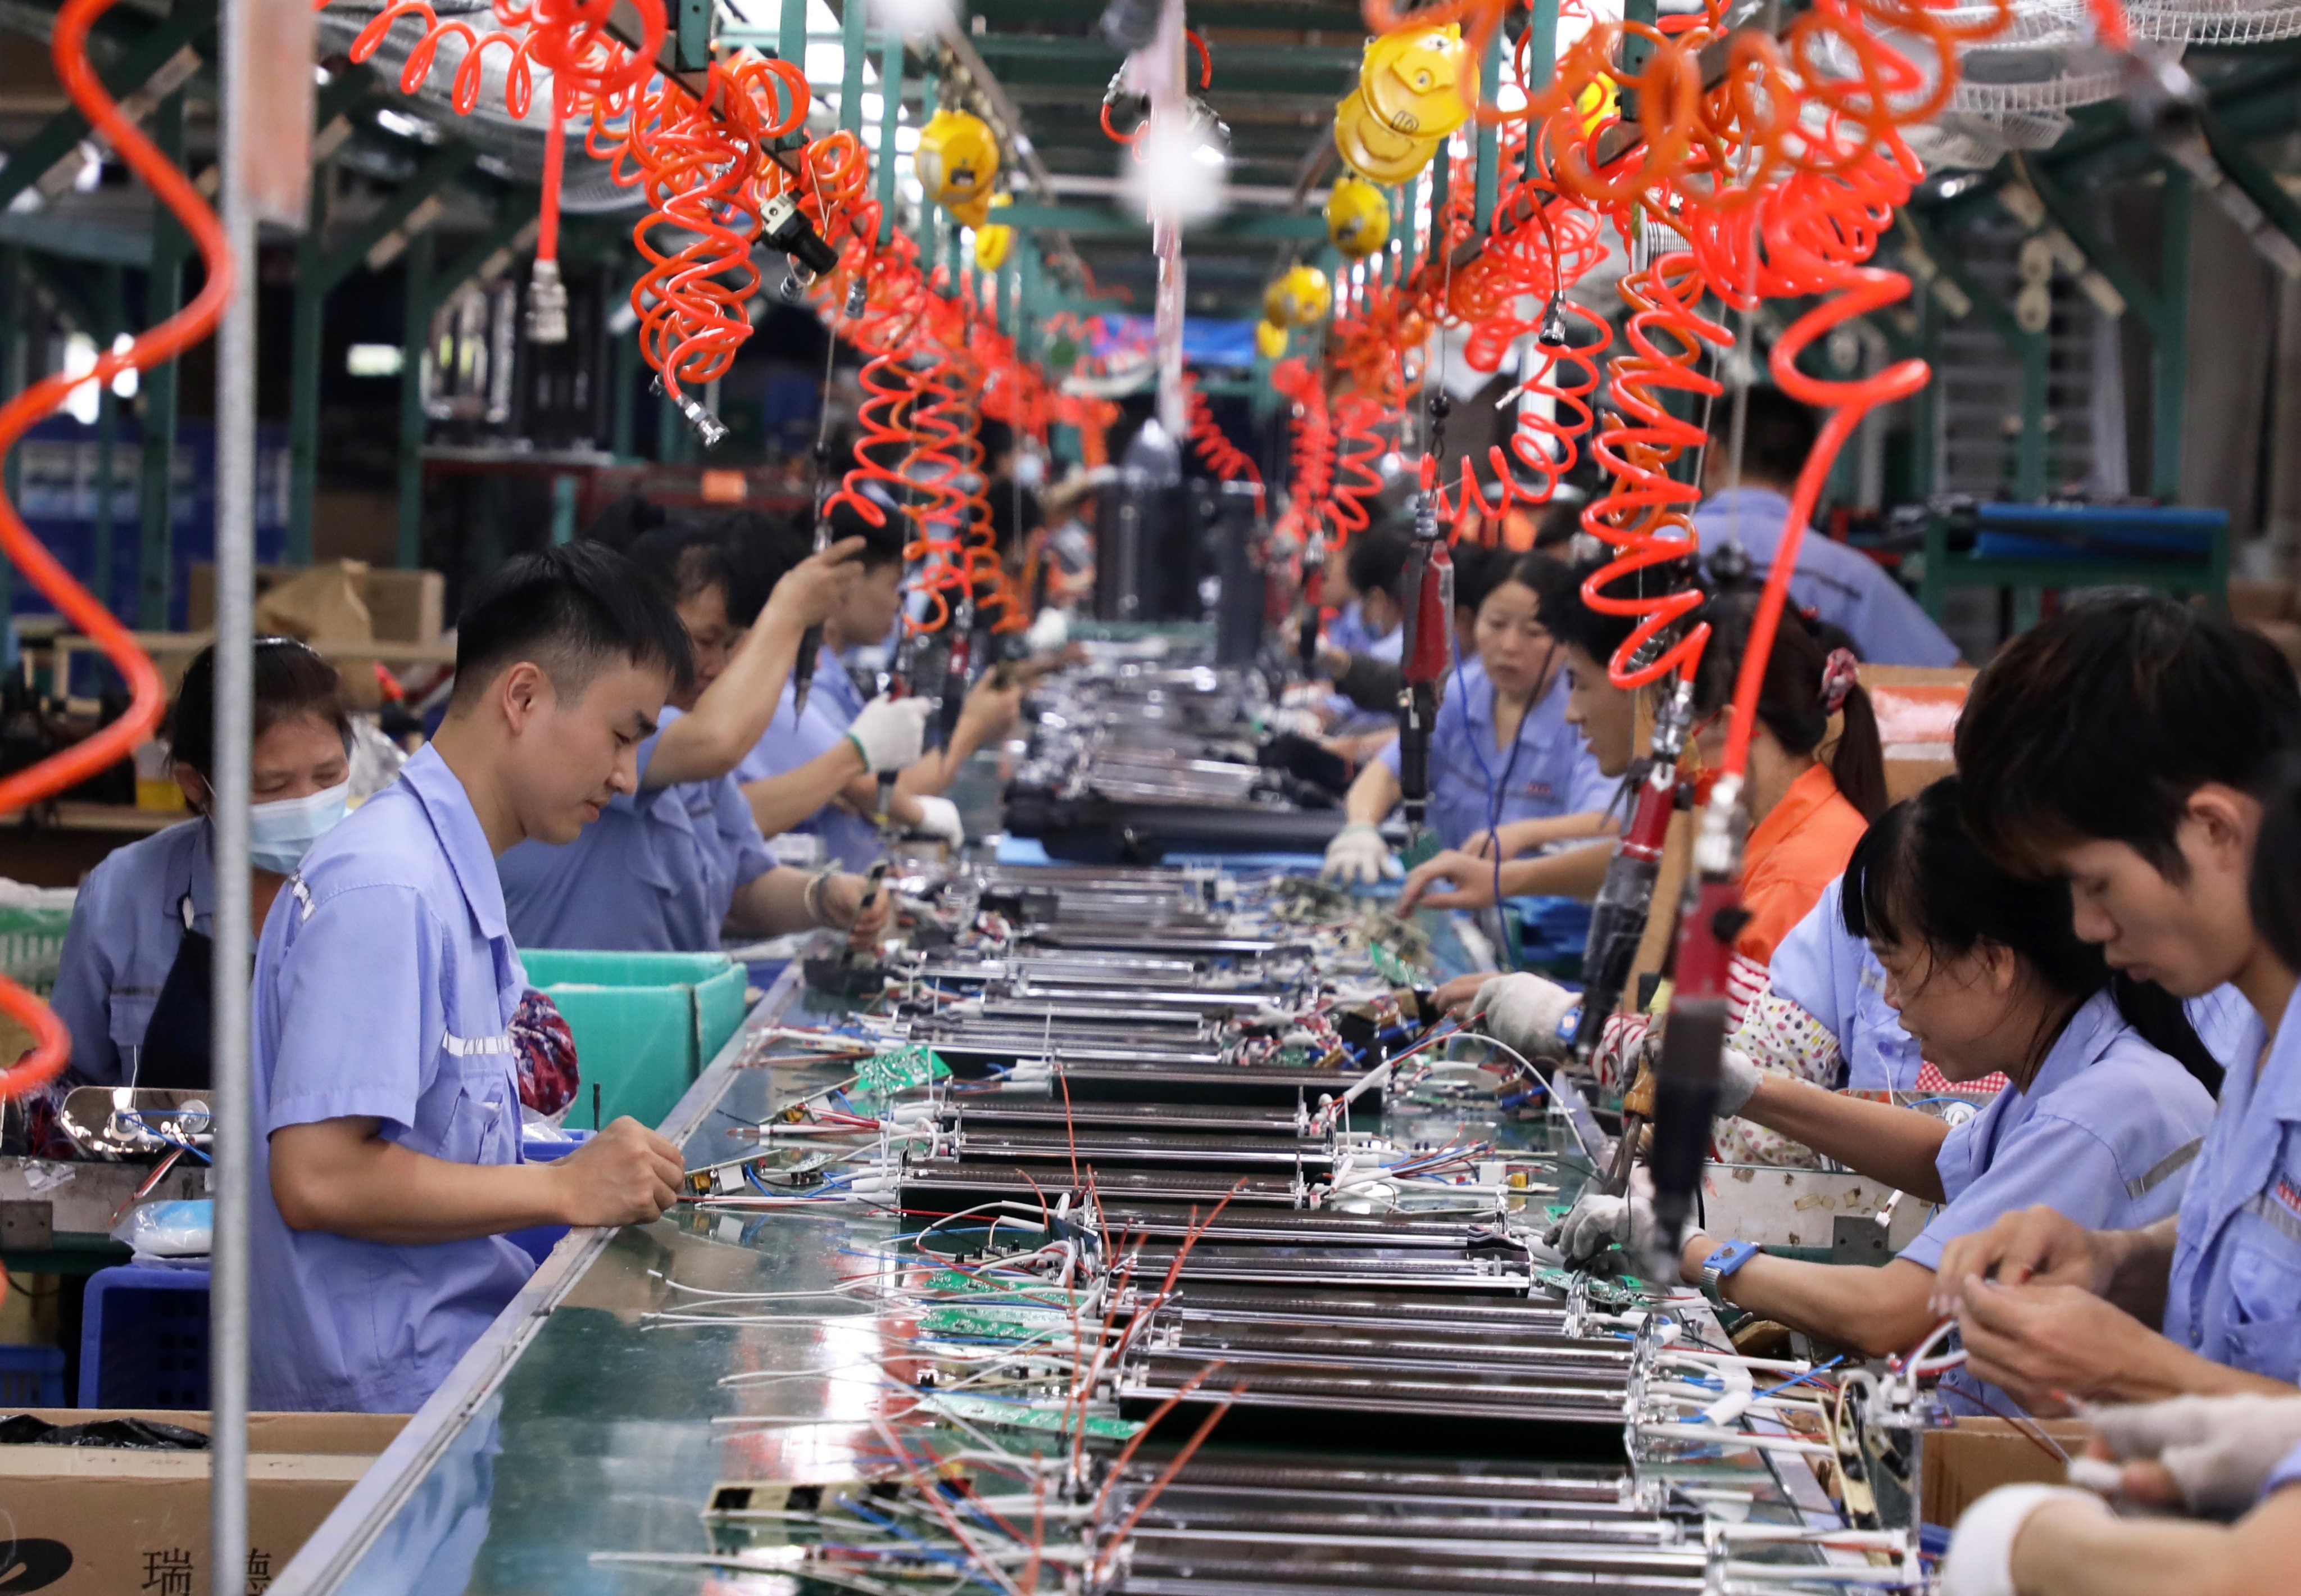 Factory workers build electric heaters in China’s Guangdong province, where authorities say they will splash out billions this year on programmes to attract foreign investment. Photo: Xinhua